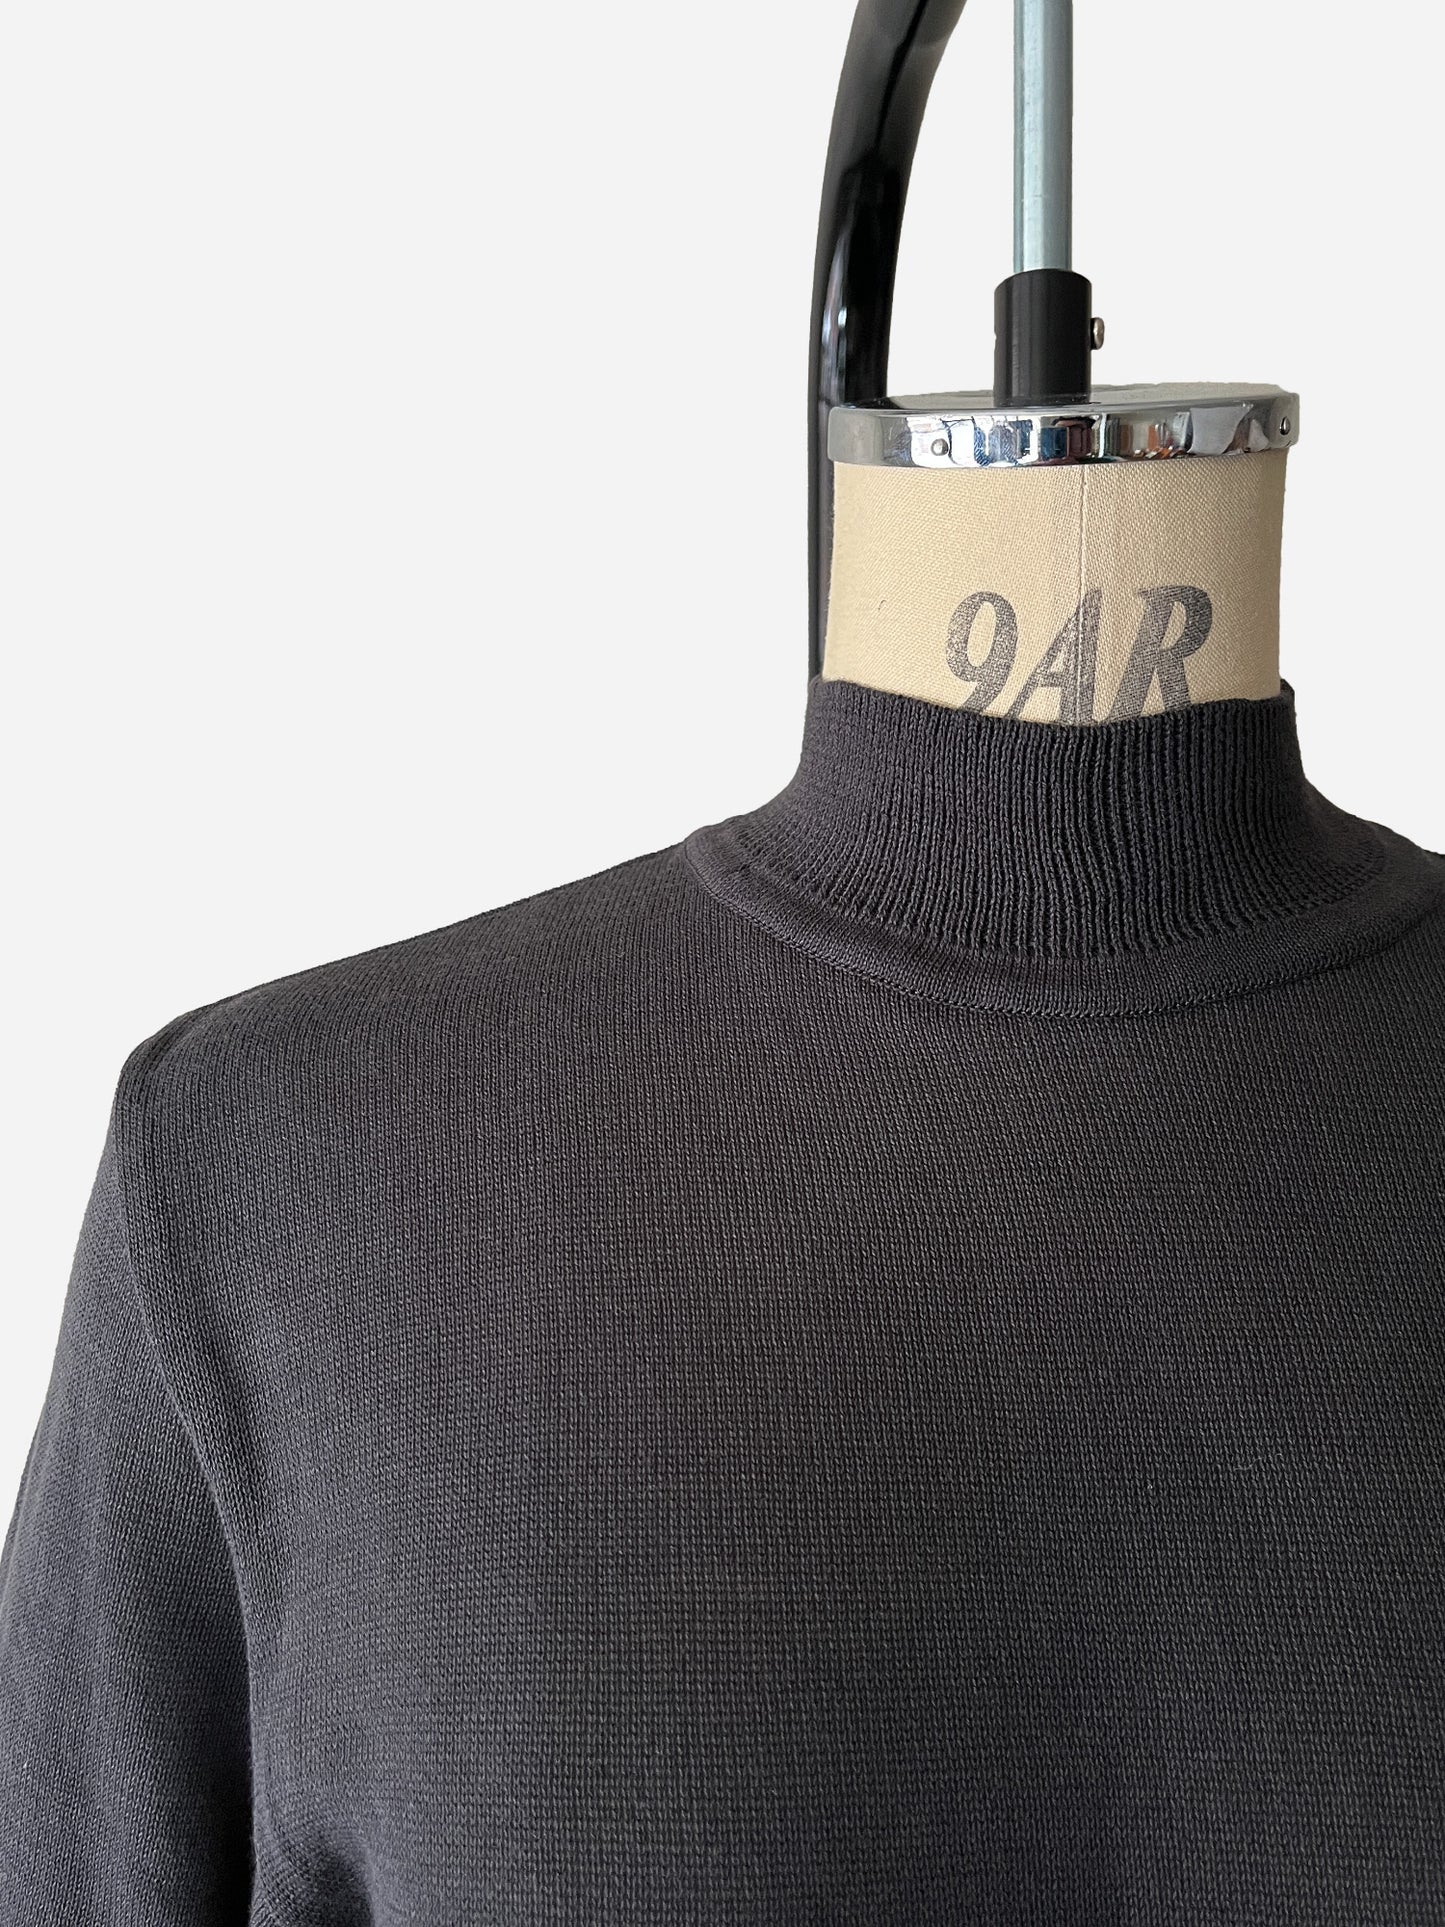 High neck po / Charcoal